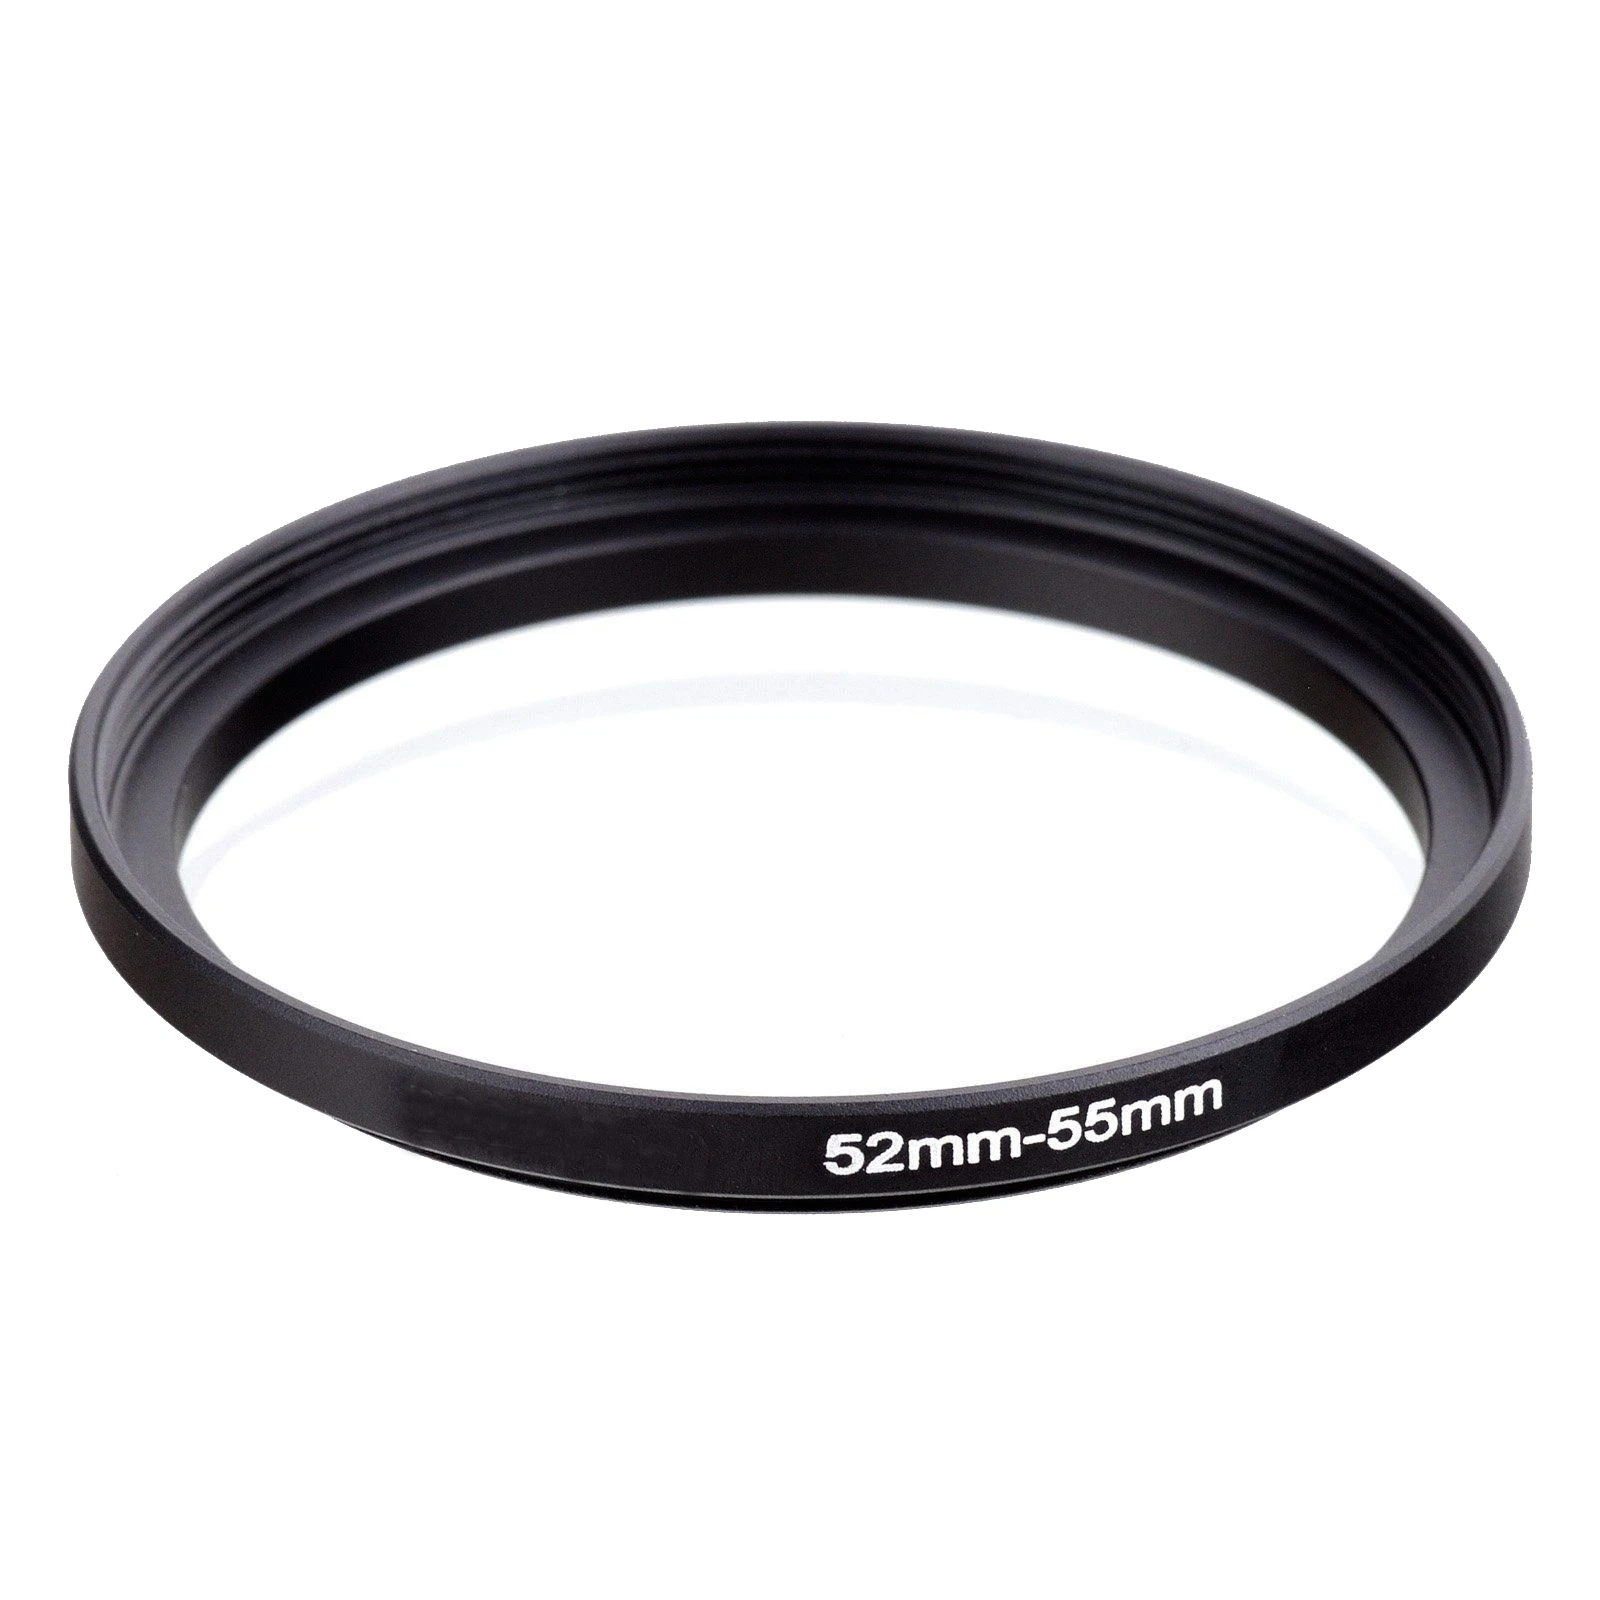 

52mm-55mm 52-55 mm 52 to 55 mm 52mm to 55mm Step UP Ring Filter Adapter